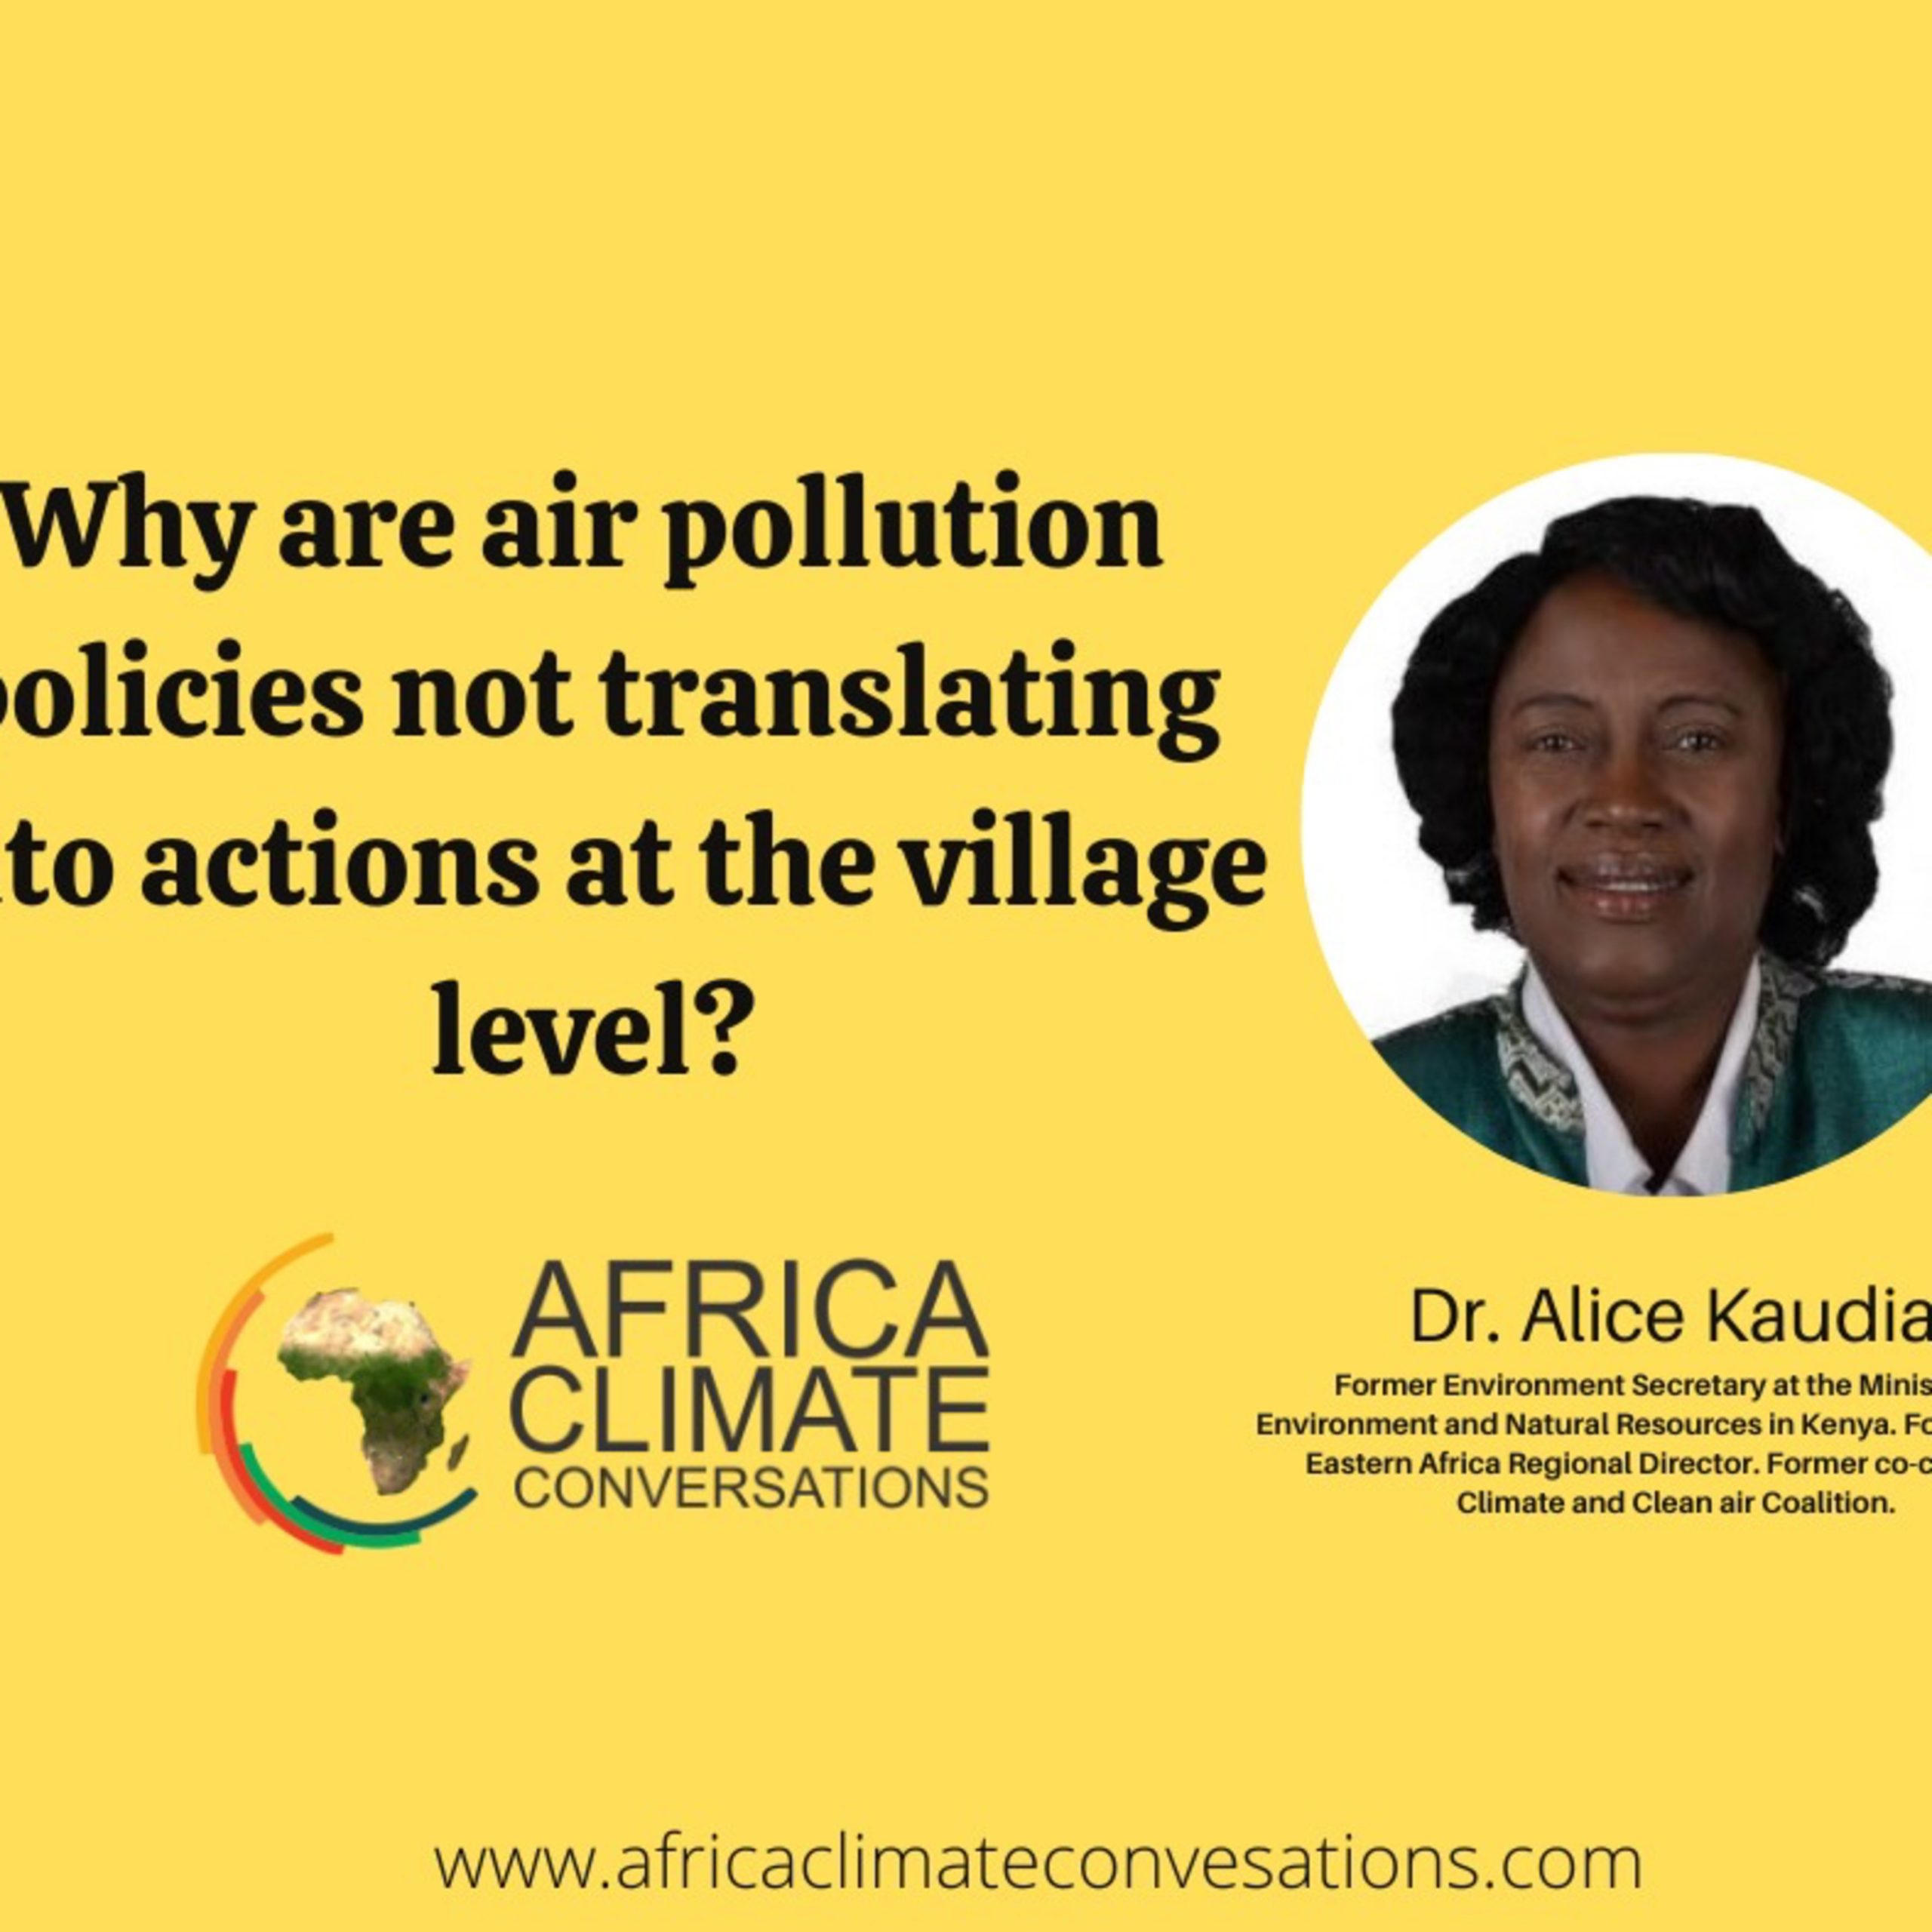 Why are air pollution policies not translating into actions at the village level?